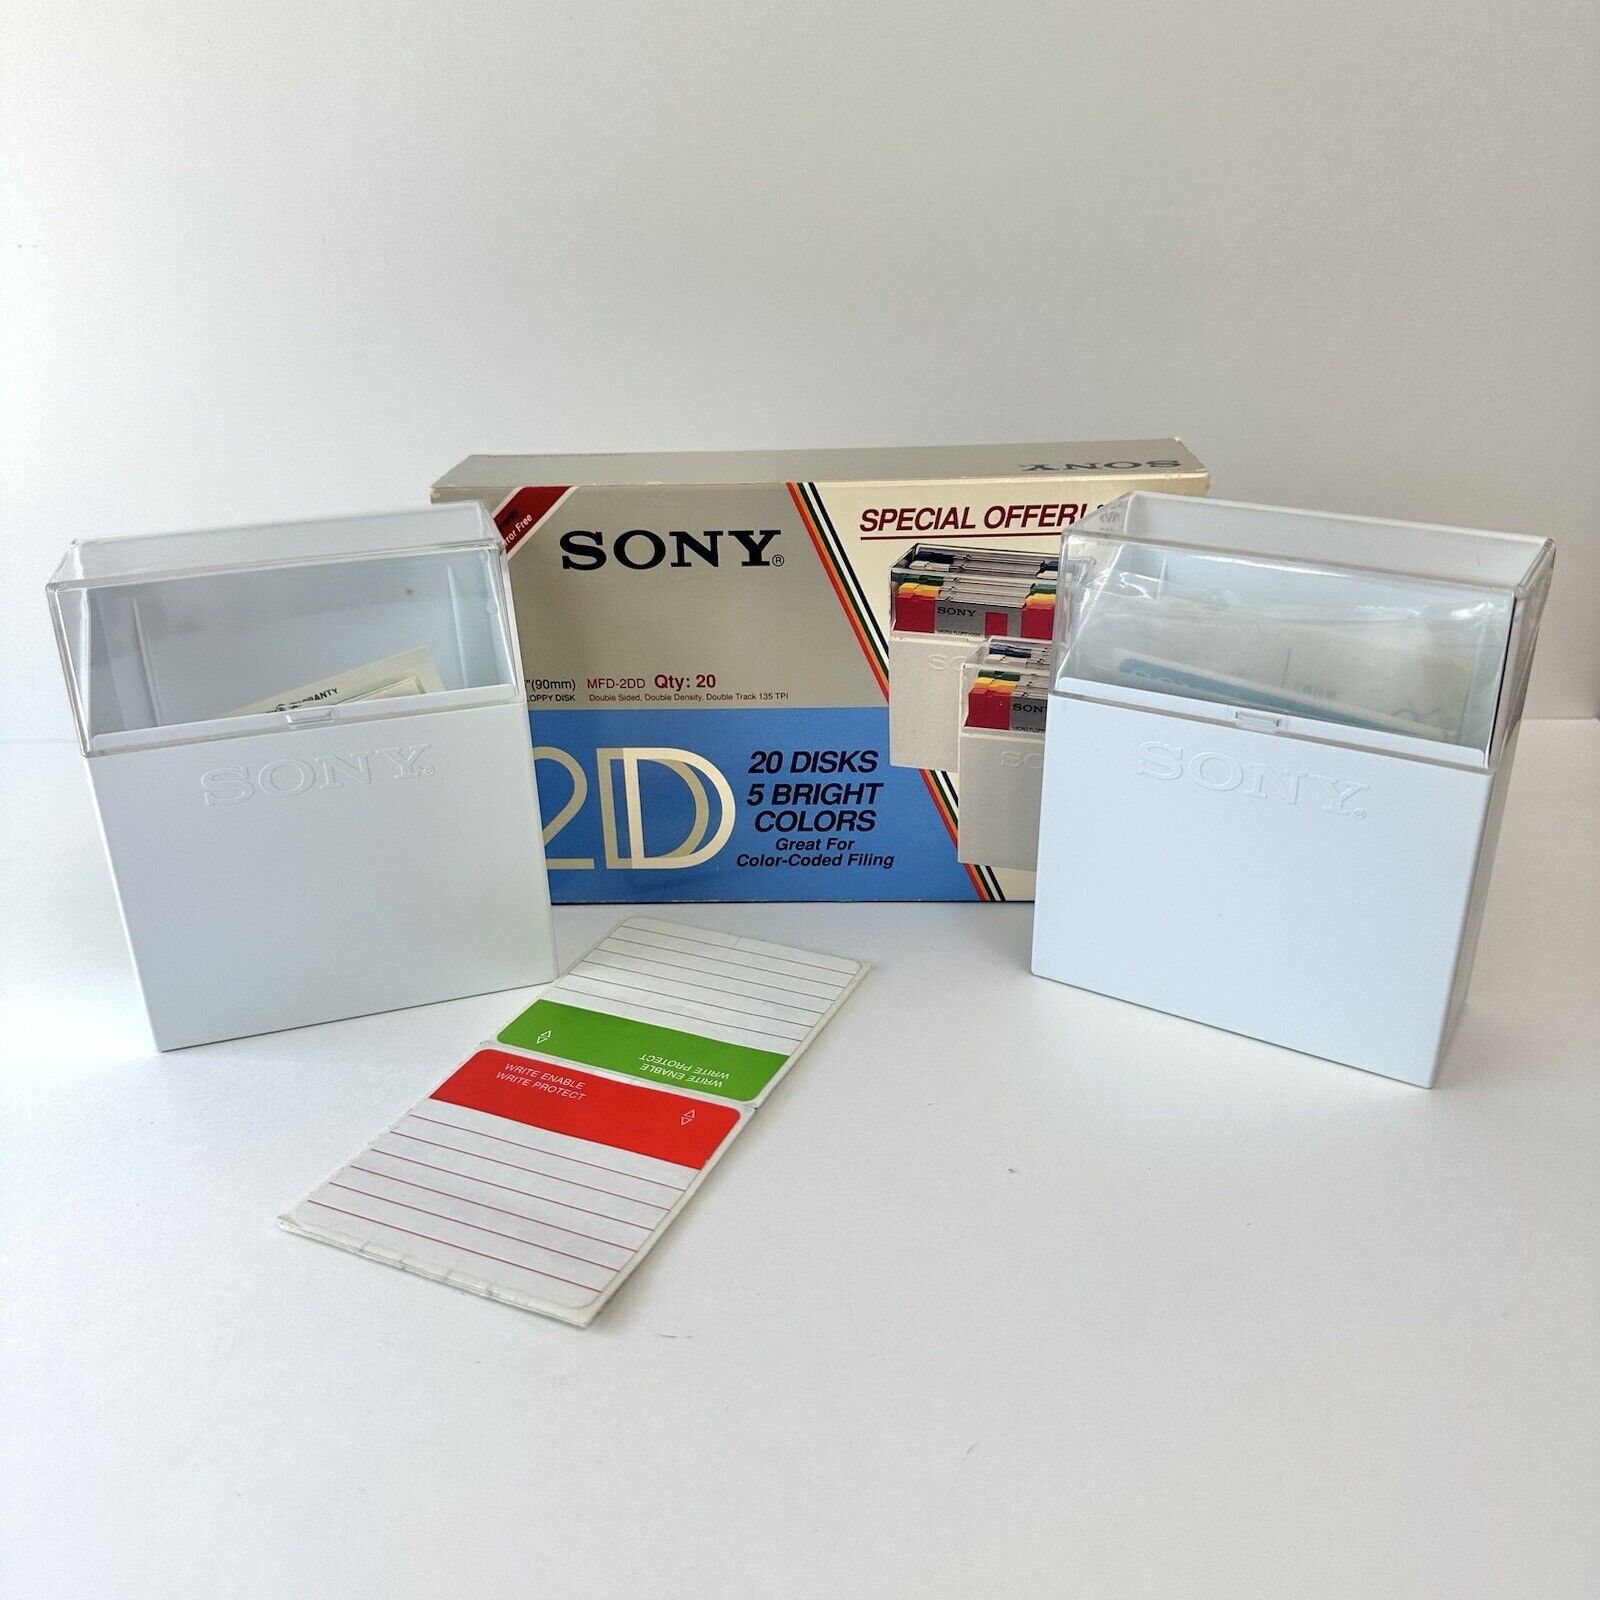 Vtg Sony MFD-2DD 3.5” Micro Floppy Disks Cases Box & Labels ONLY Made USA